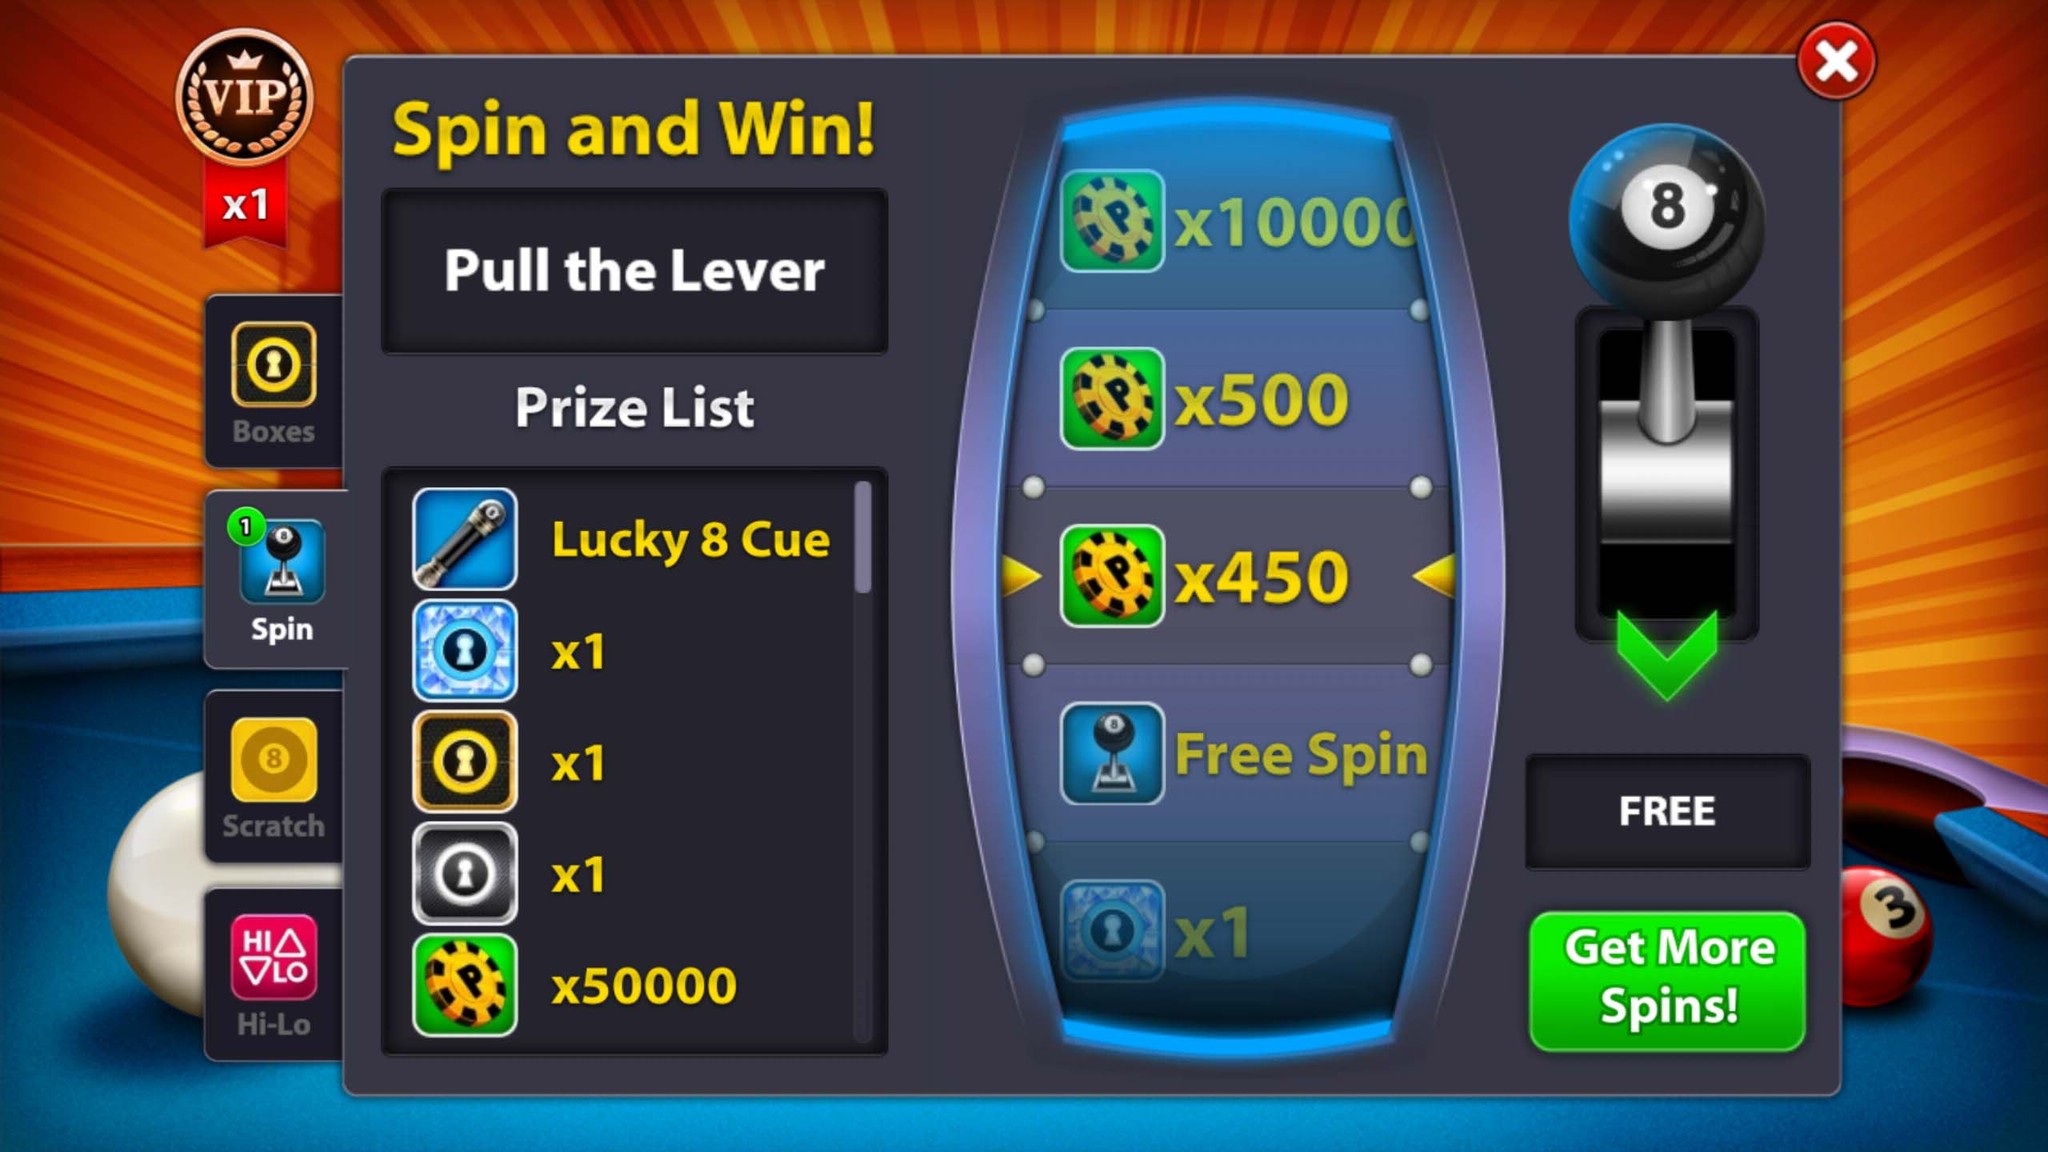 Spin vip. Grand Heist-Spin &win and Golden Spin 8 Ball Pool. Spin and win. 8 Ball Pool Play a Golden Spin. Где находится Spin and win в 8 Ball Pool.